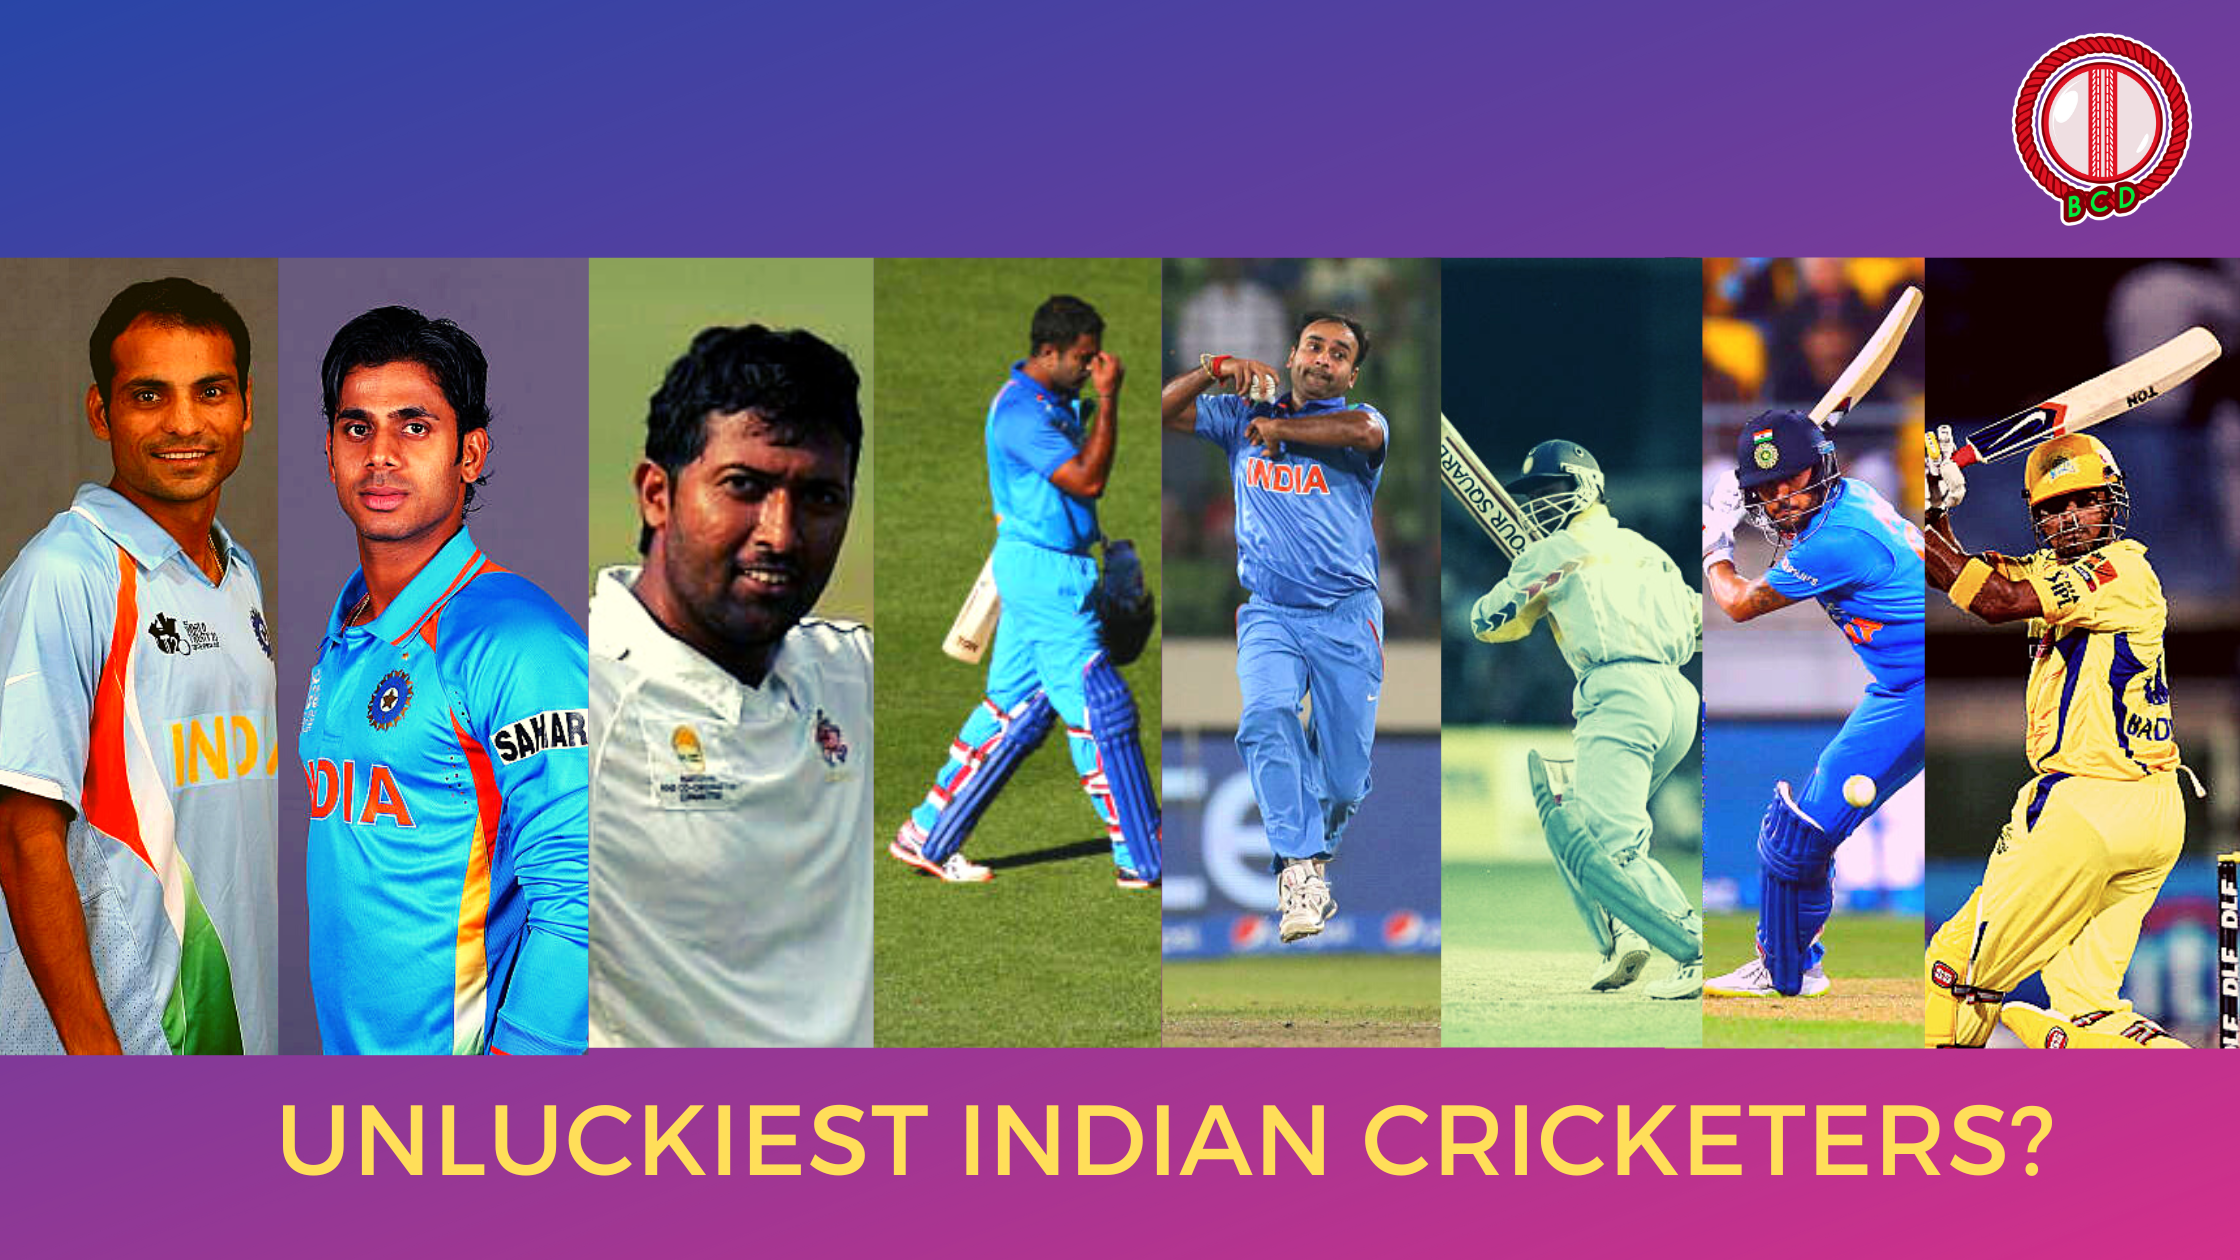 Unluckiest Indian Cricketers - Collage of 8 Indian cricket players